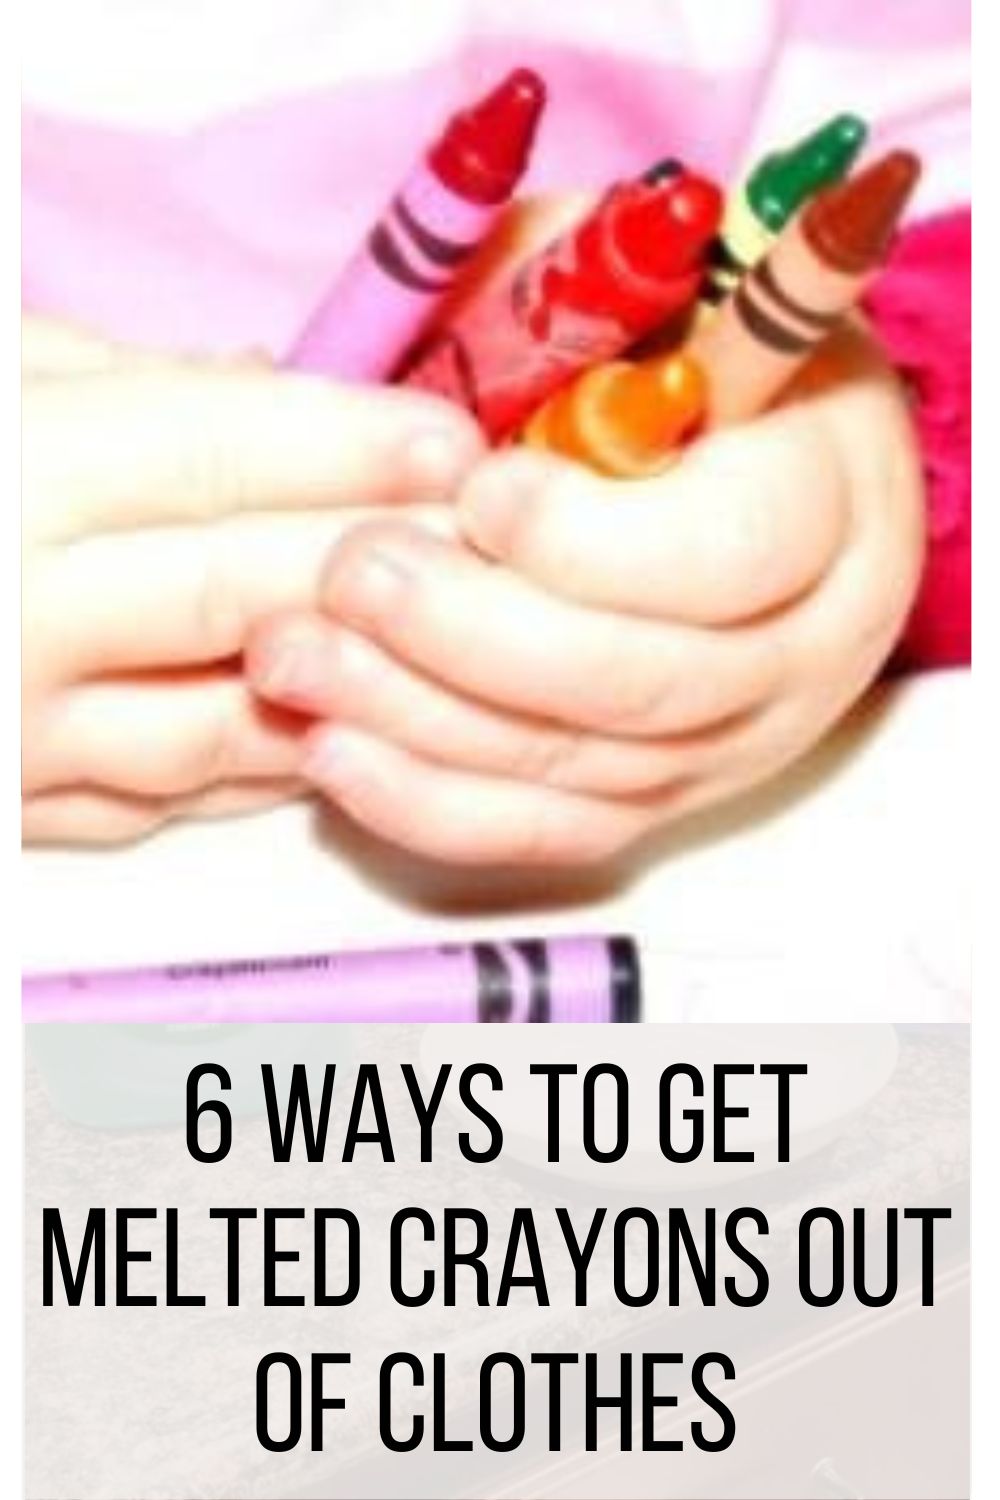 6 Ways to Get Melted Crayons Out of Clothes